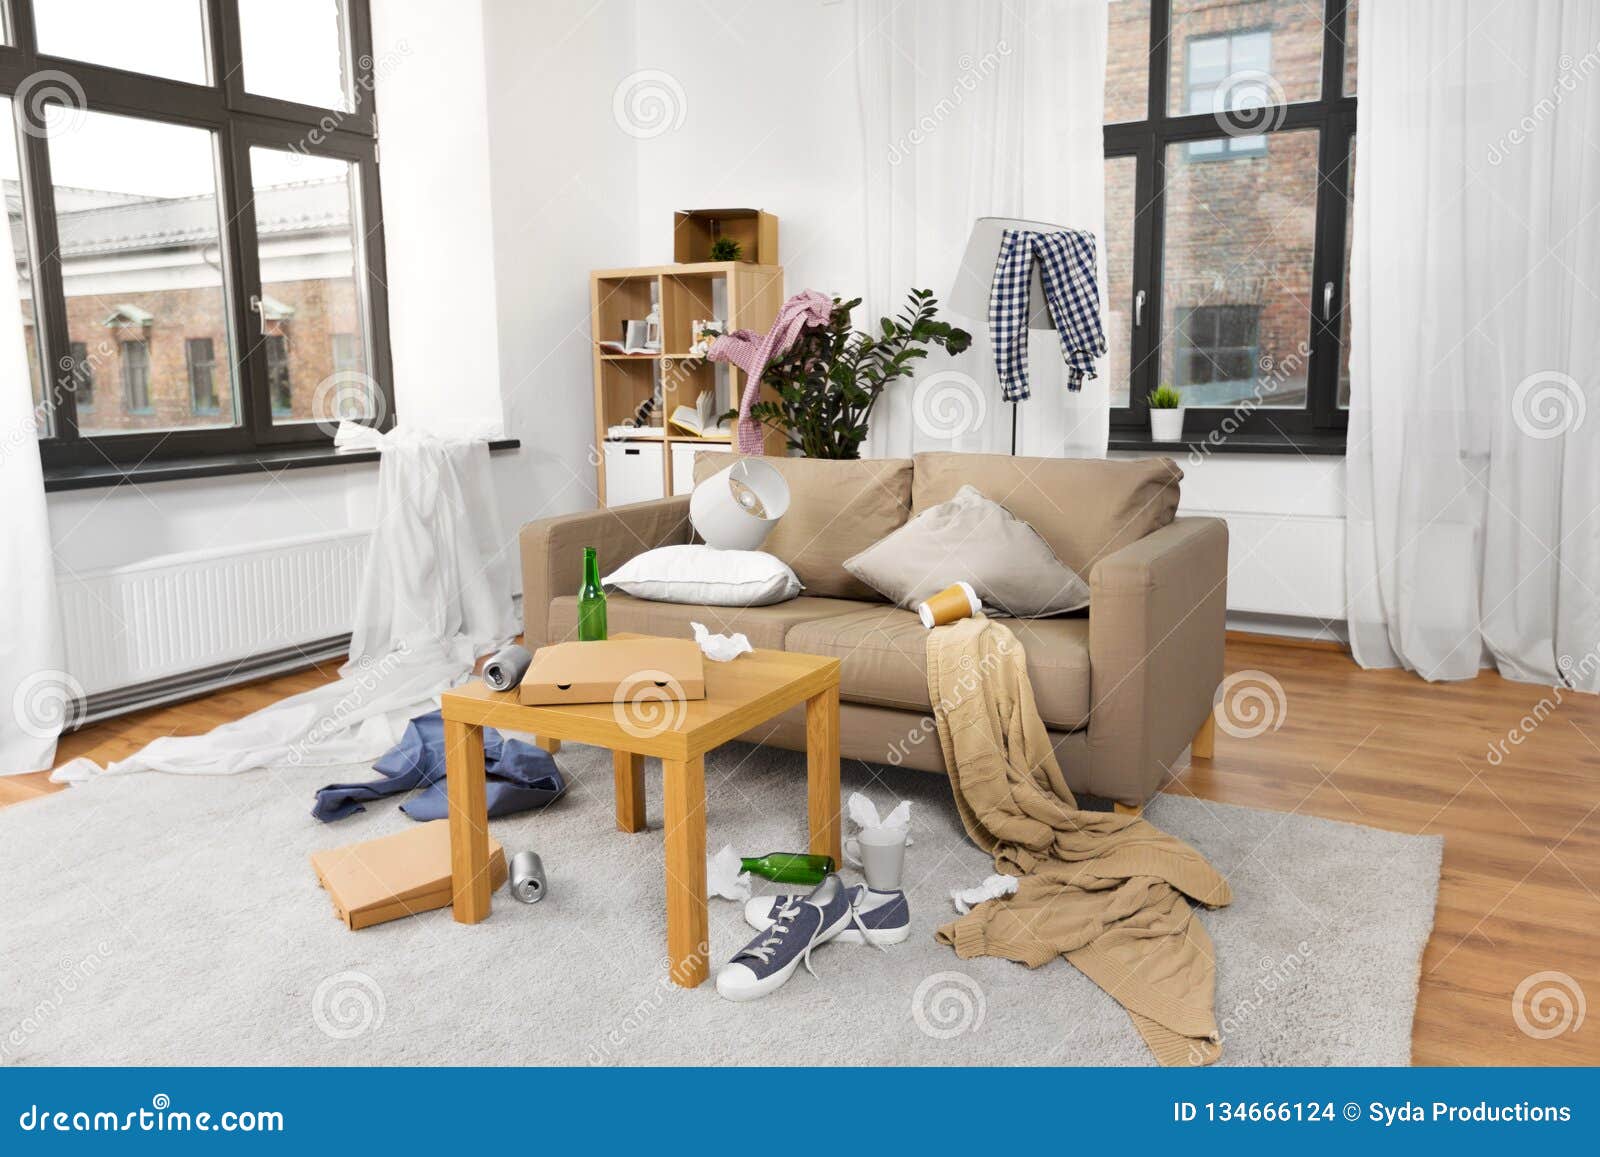 interior of messy home room with scattered stuff